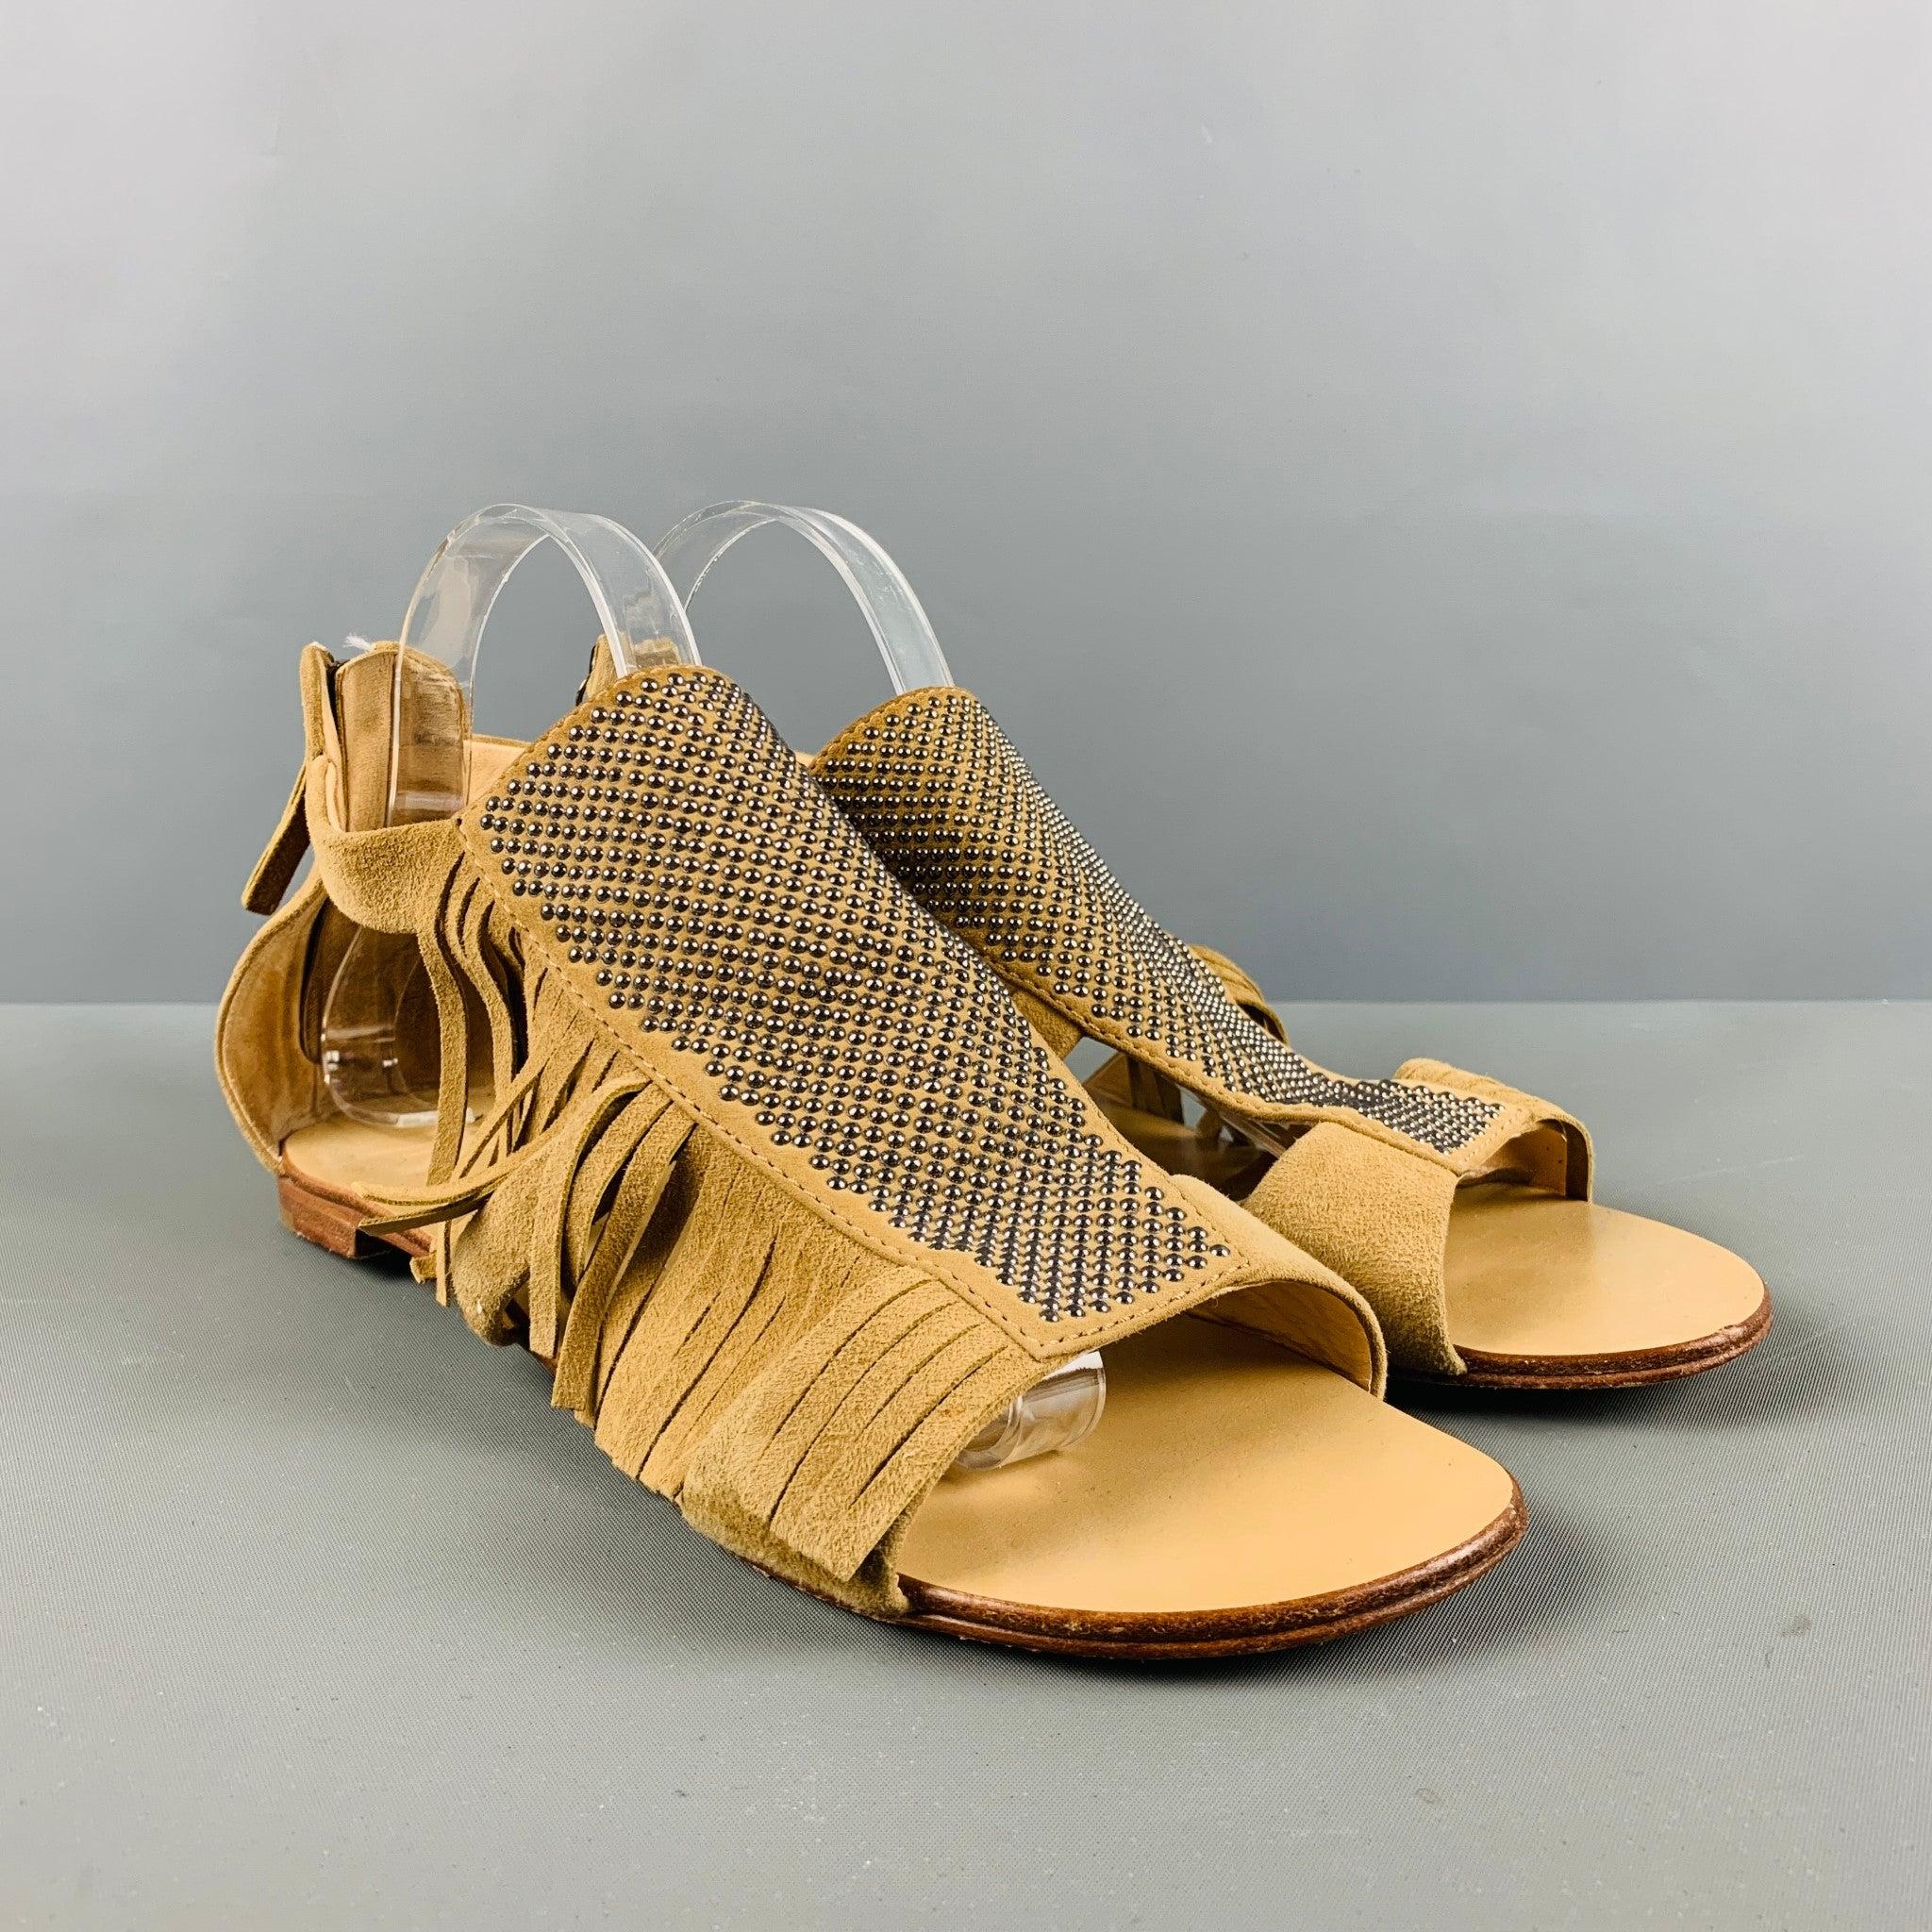 GIUSEPPE ZANOTTI sandals comes in a beige suede featuring a fringed design, silver studded detail, and a zip up ankle style. Very Good Pre-Owned Condition. 

Marked:   40Outsole: 10.5 inches  x 3.25 inches  
  
  
 
Reference No.: 128325
Category: